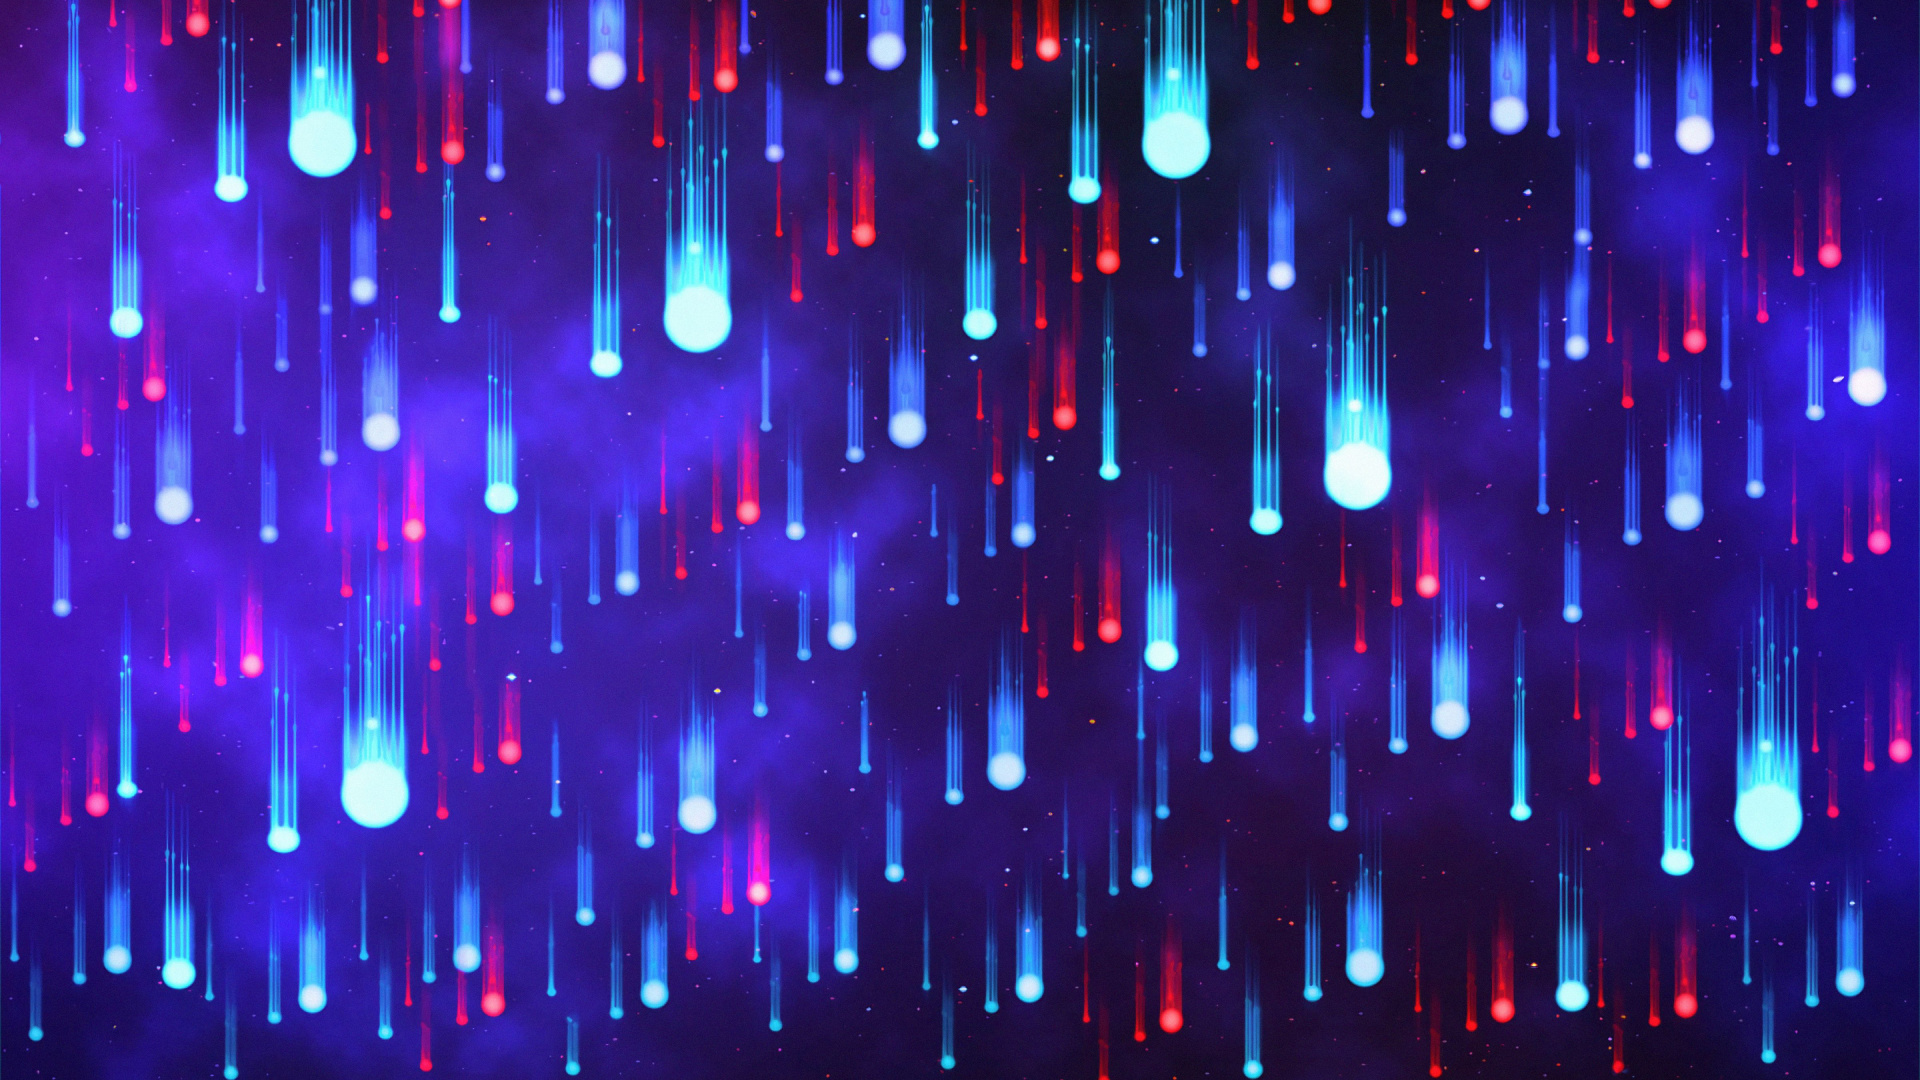 Pink and Blue Lights on a Dark Room. Wallpaper in 1920x1080 Resolution